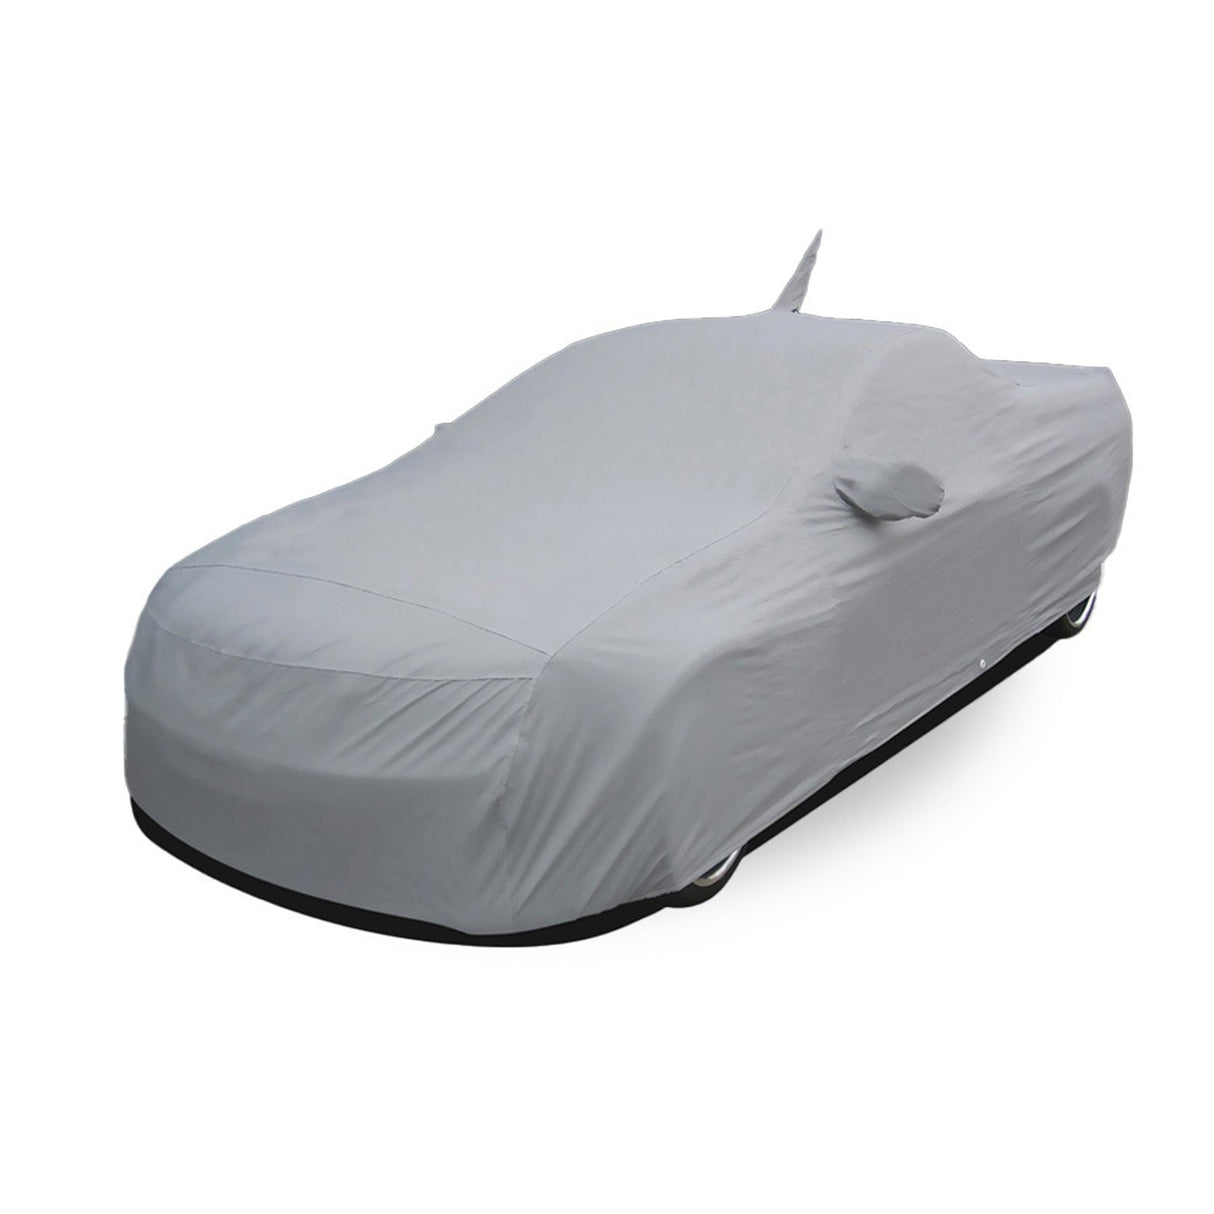 2000-2002 HSV Clubsport VX Sedan with wing   2 mirrors EazyShield Custom Outdoor Cover